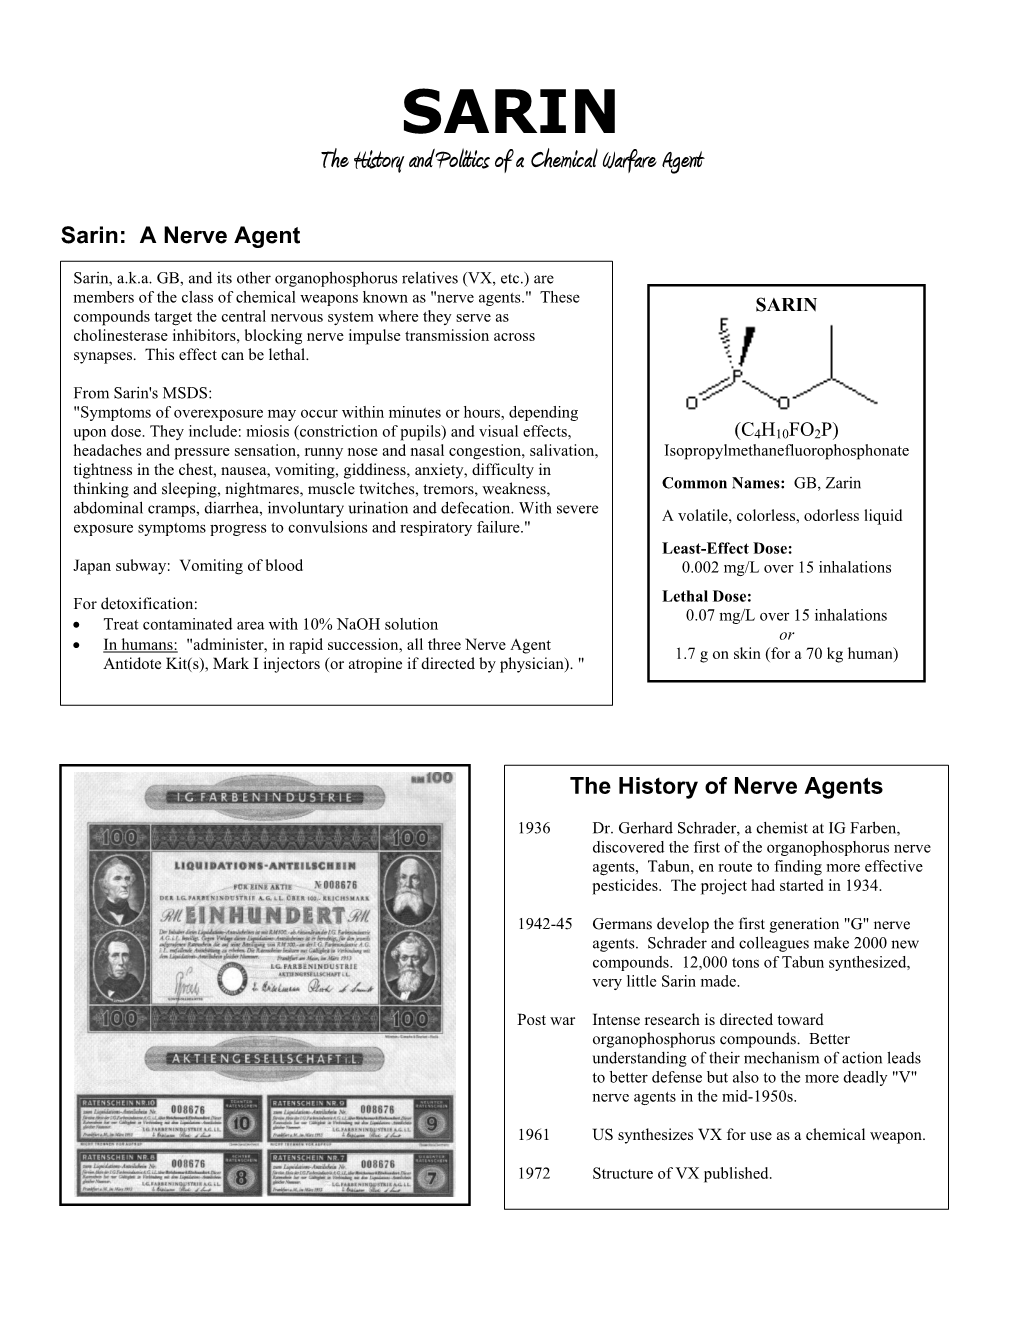 SARIN the History and Politics of a Chemical Warfare Agent